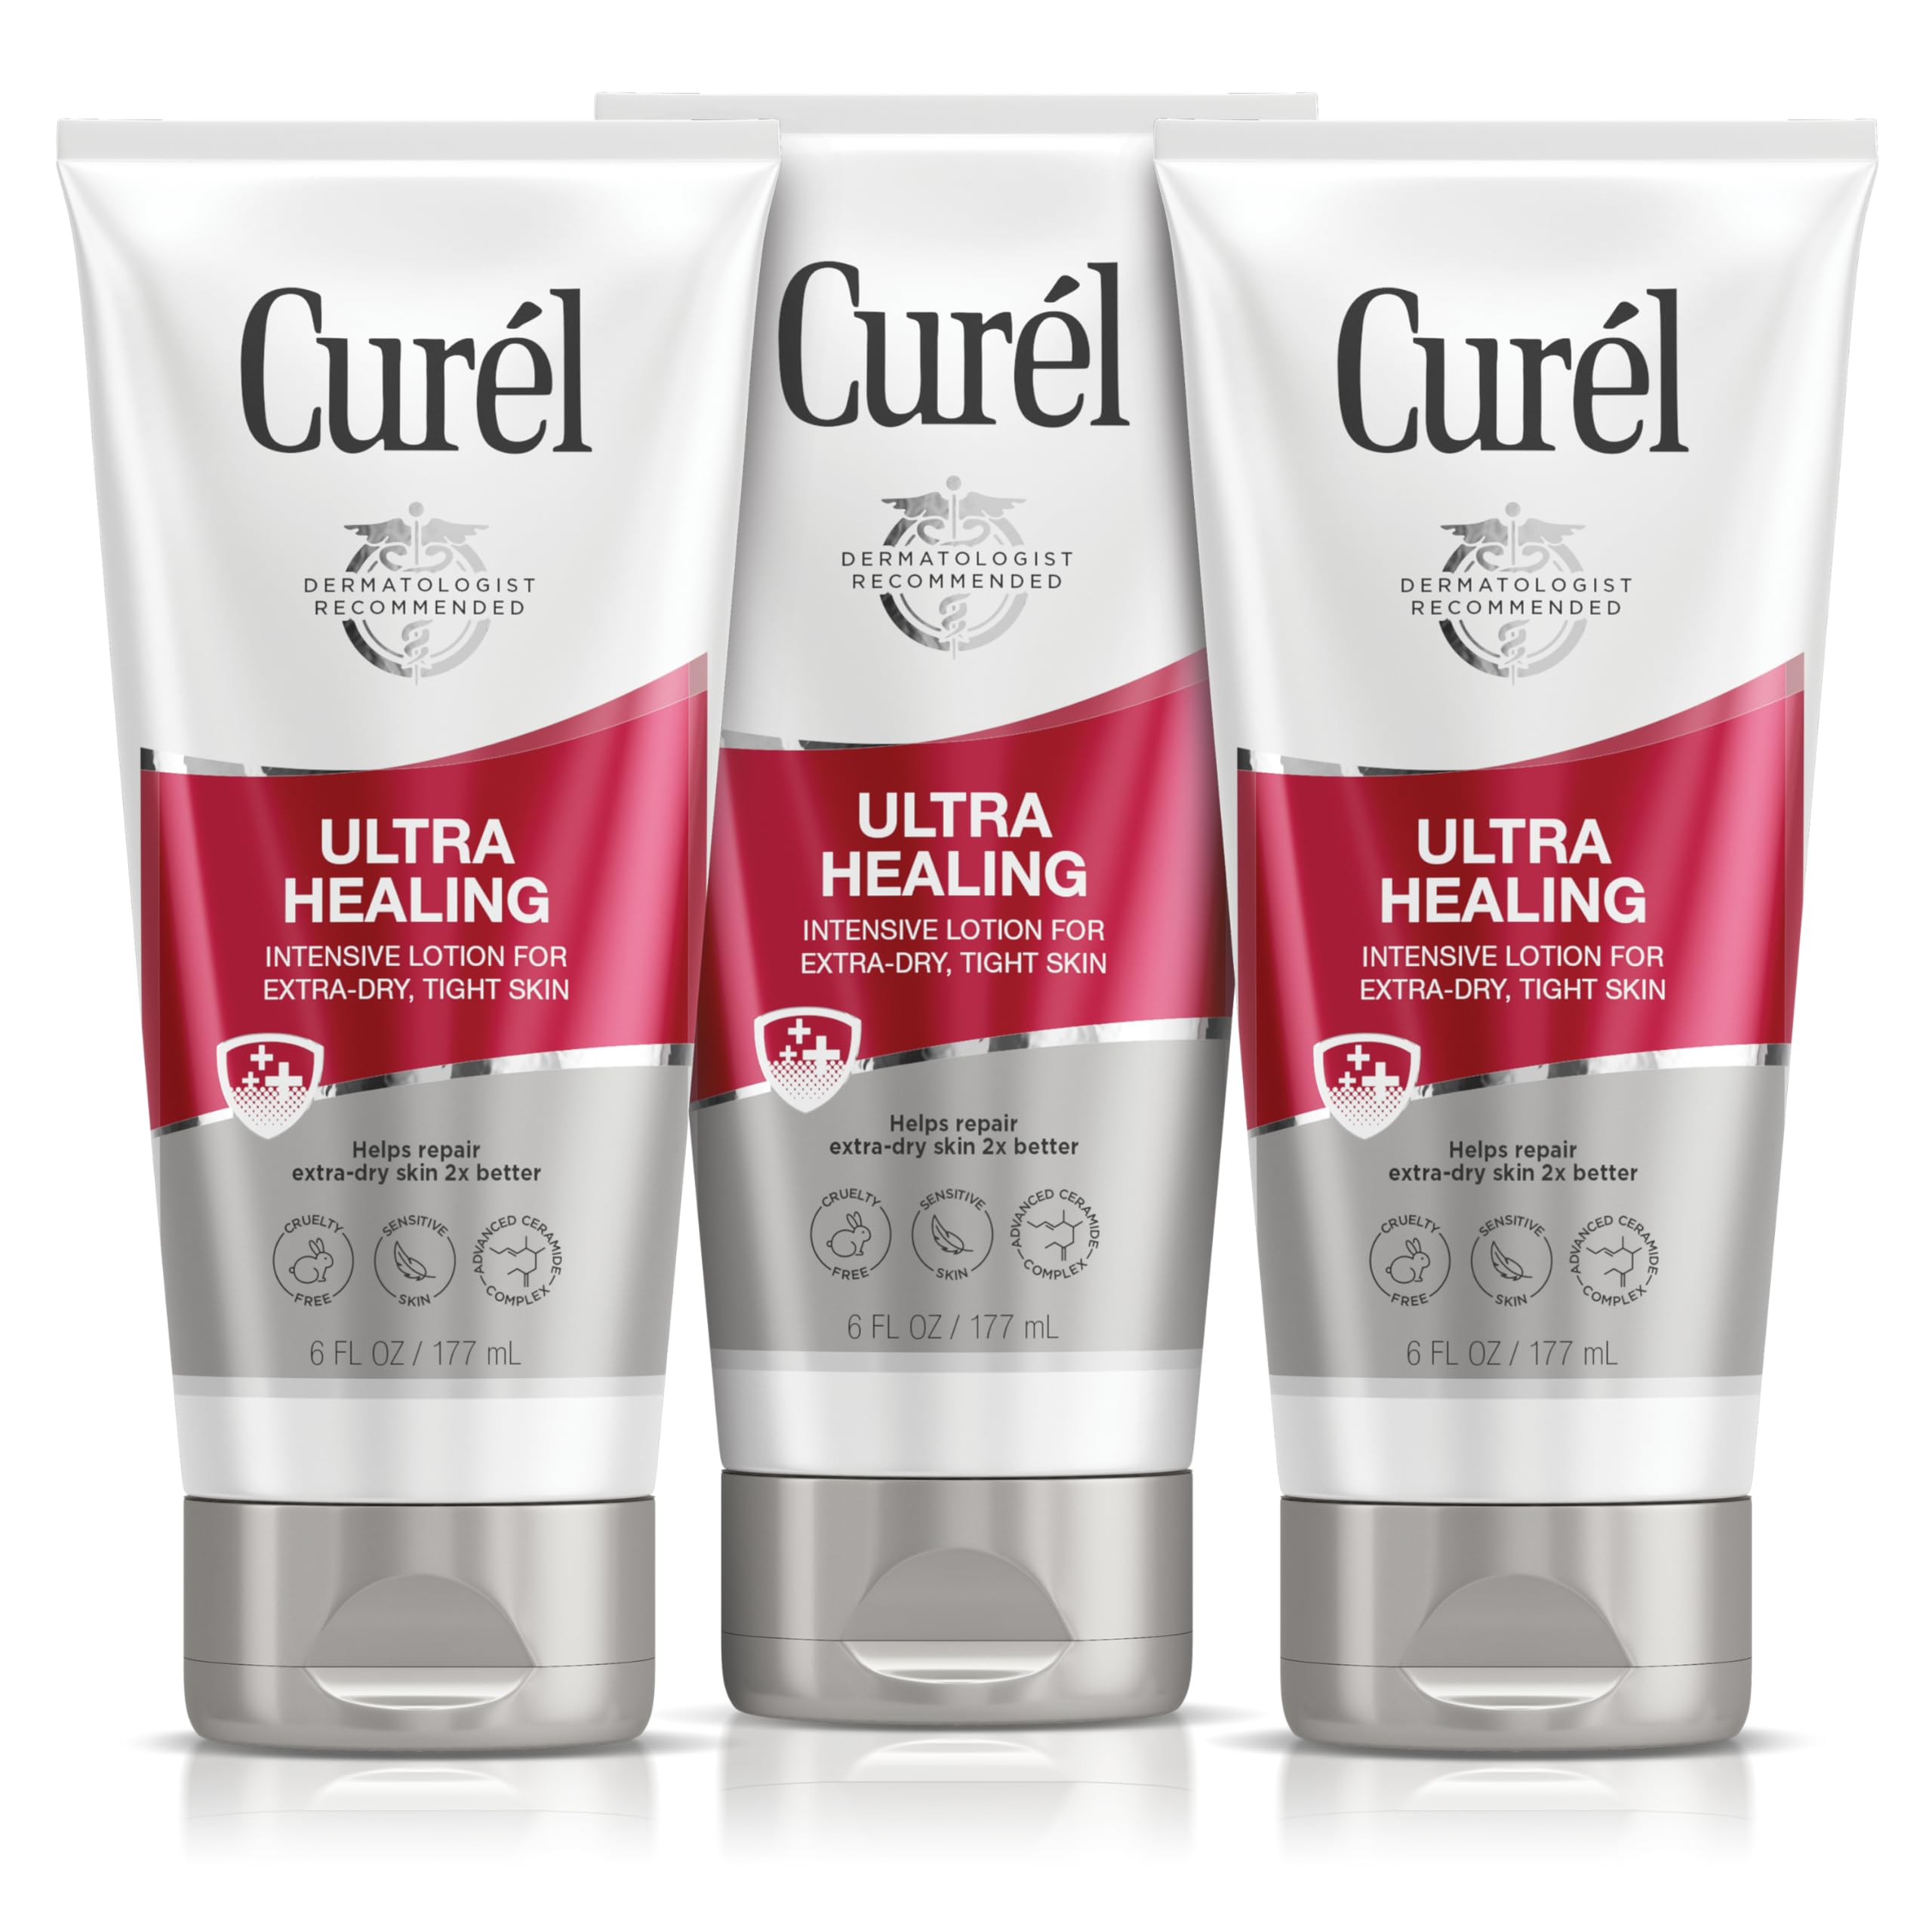 Curel Ultra Healing Intensive Fragrance-Free Lotion For Extra-Dry Skin, Dermatologist Recommended, Ideal for Sensitive Skin, Cruelty Free, Paraben Free, 3-6 Oz